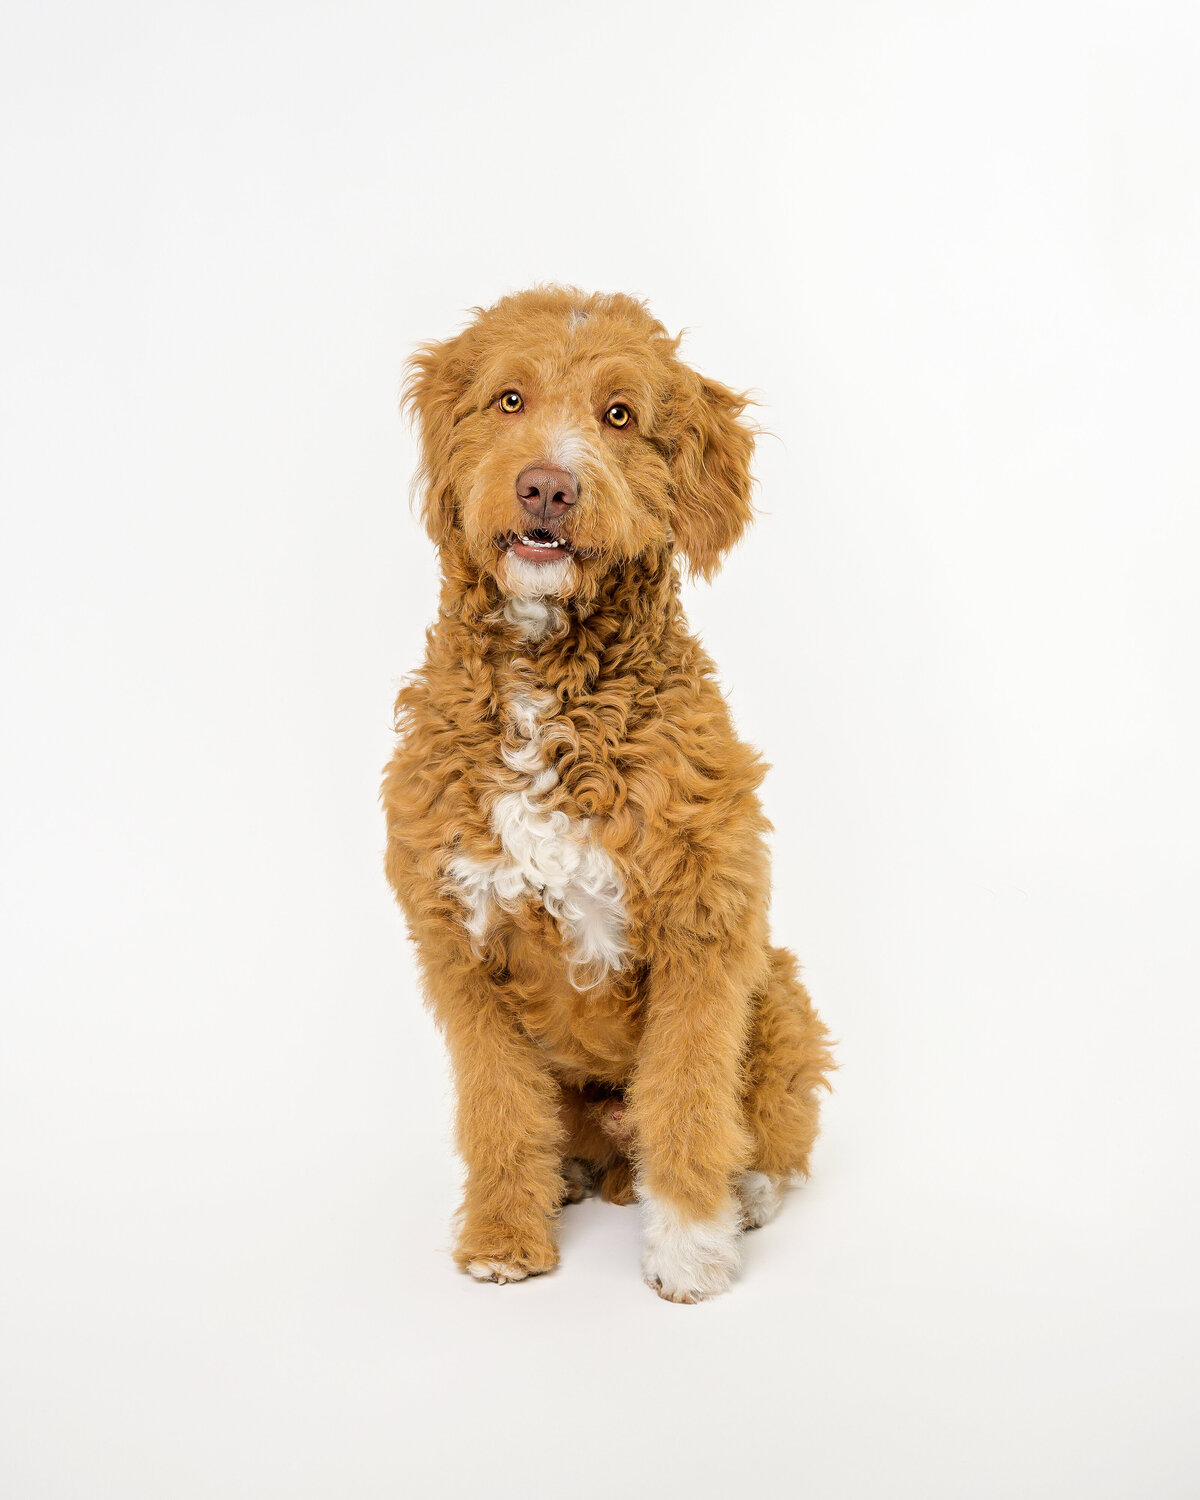 Experience the charm of lifestyle studio pet portrait photography in Vancouver with Pets through the Lens Photography. This beautiful image features a curly-coated dog sitting against a clean, white backdrop, perfectly capturing its sweet and expressive demeanor. Our professional studio specializes in high-quality, natural pet portraits that highlight the unique personality and lifestyle of your furry friends. Choose Pets through the Lens Photography for the finest lifestyle pet photography experience in Vancouver.